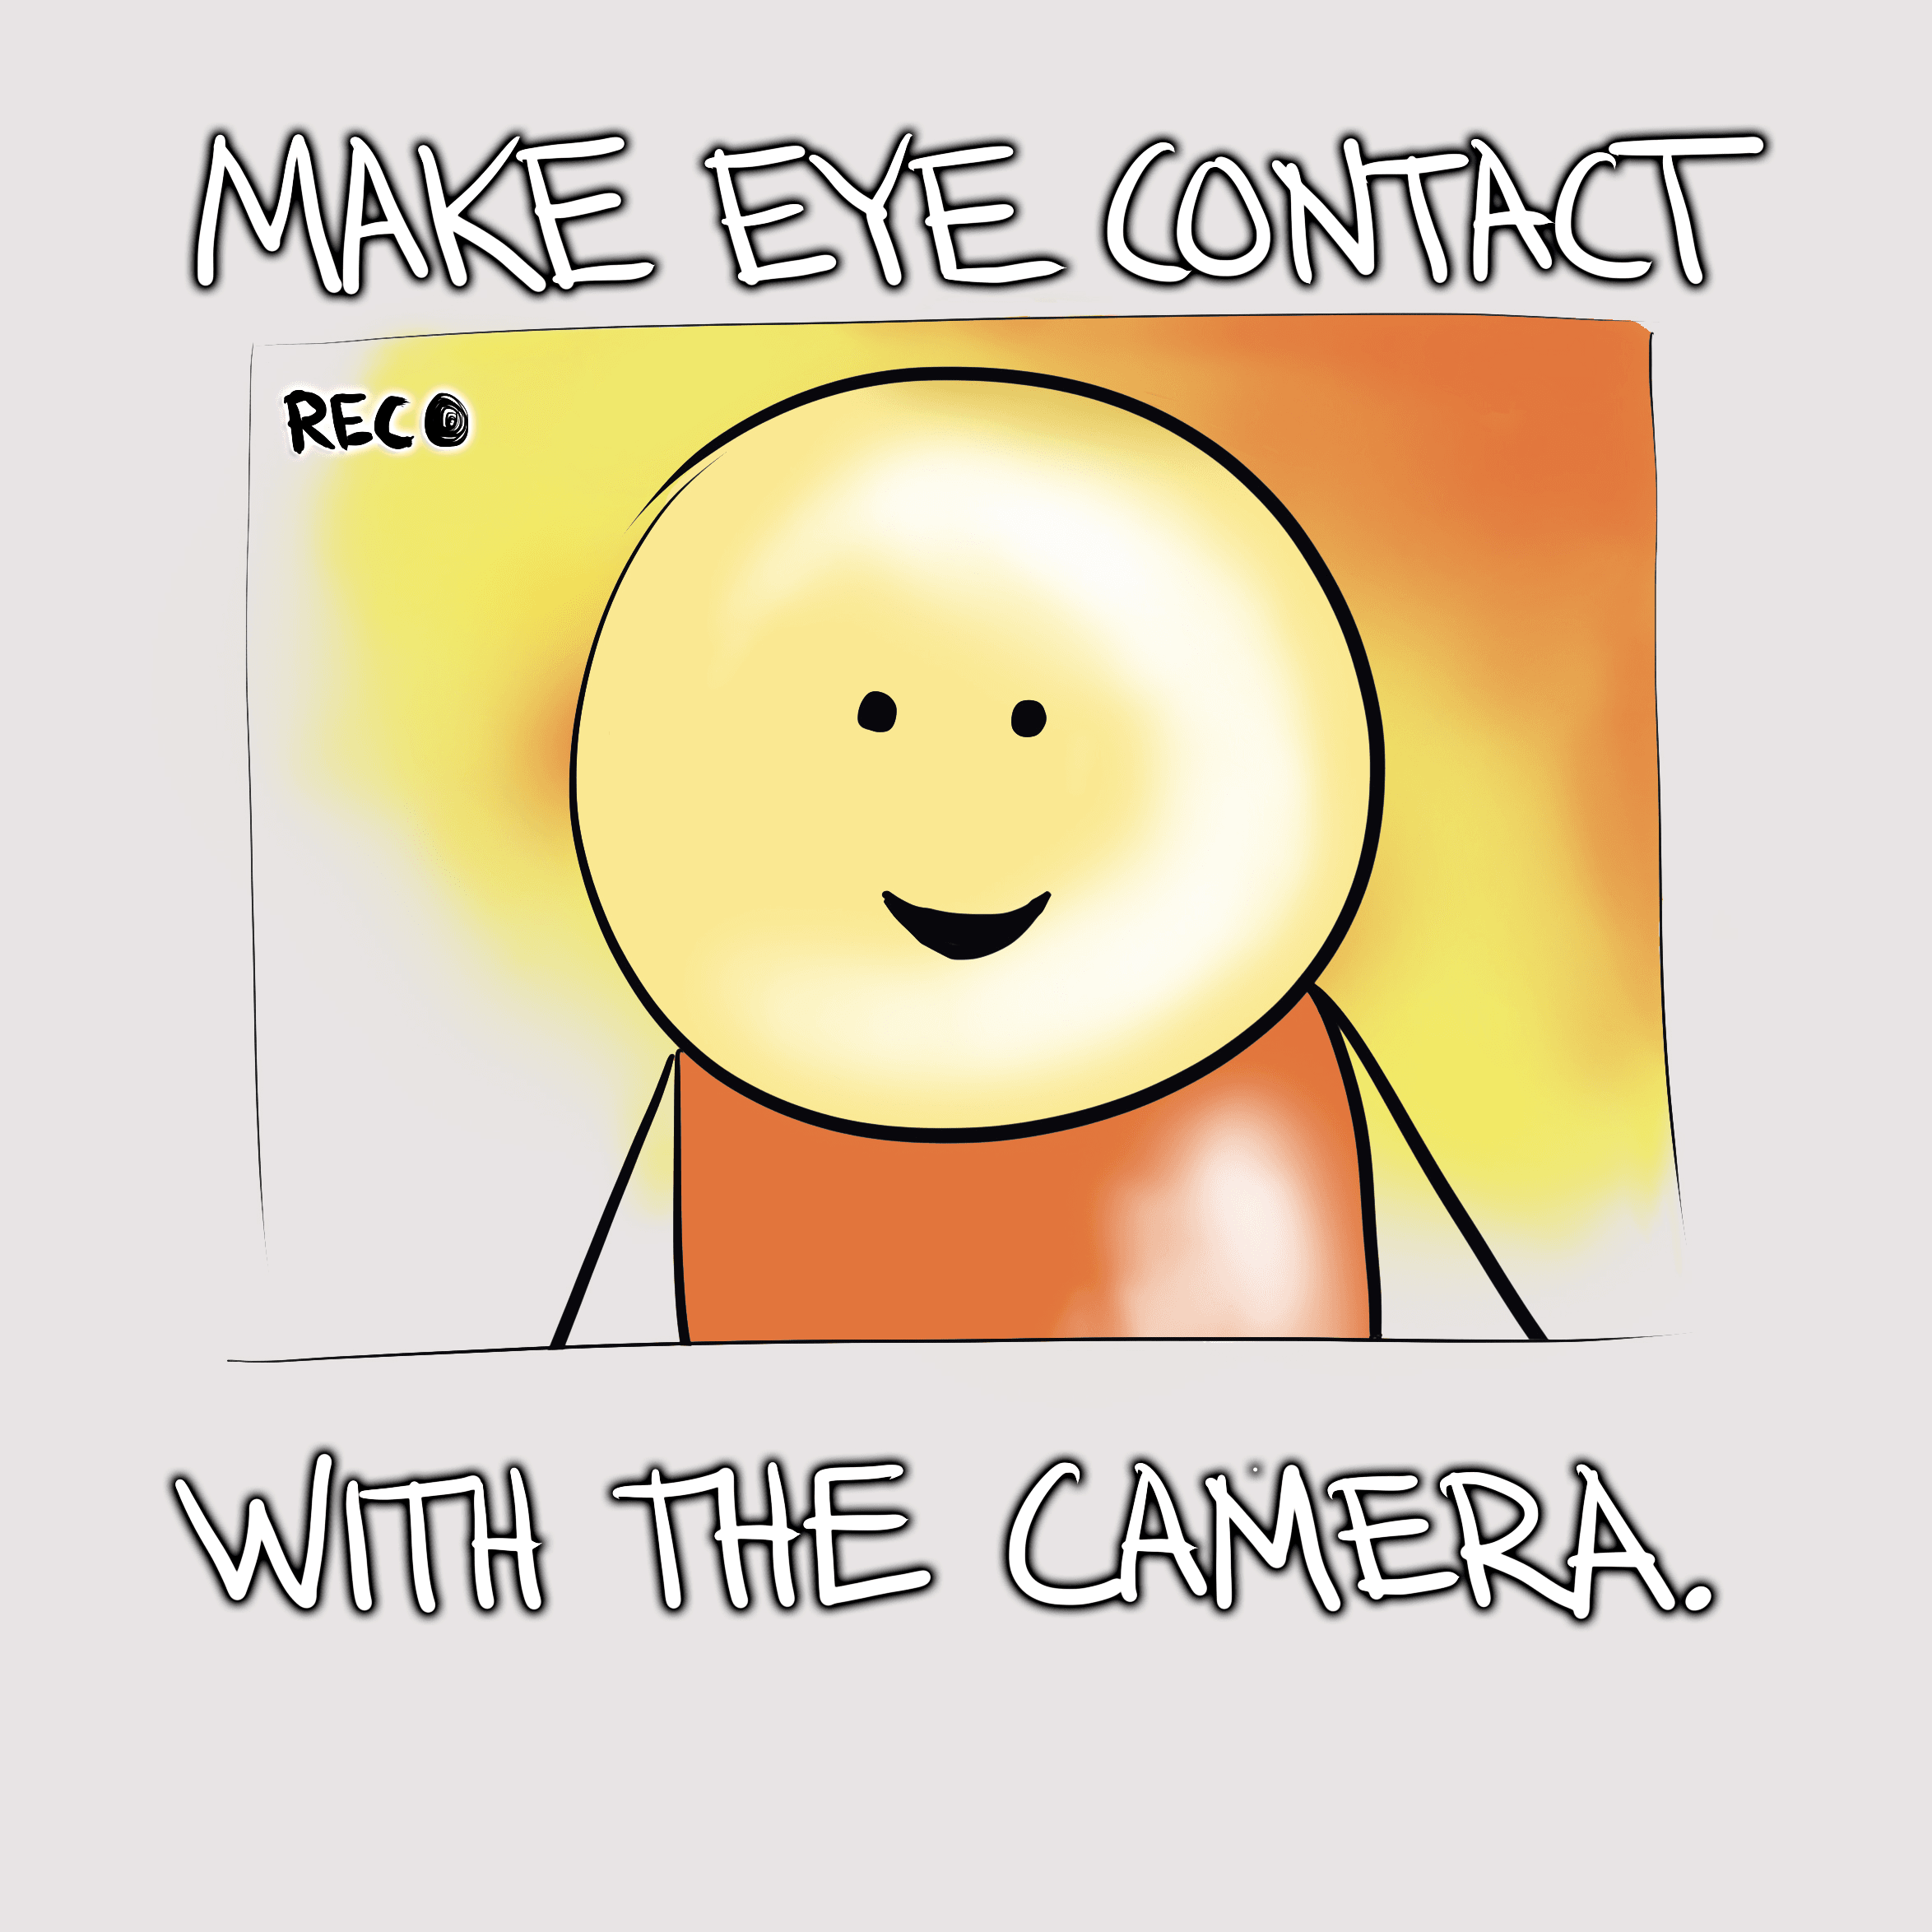 Eye contact with the camera